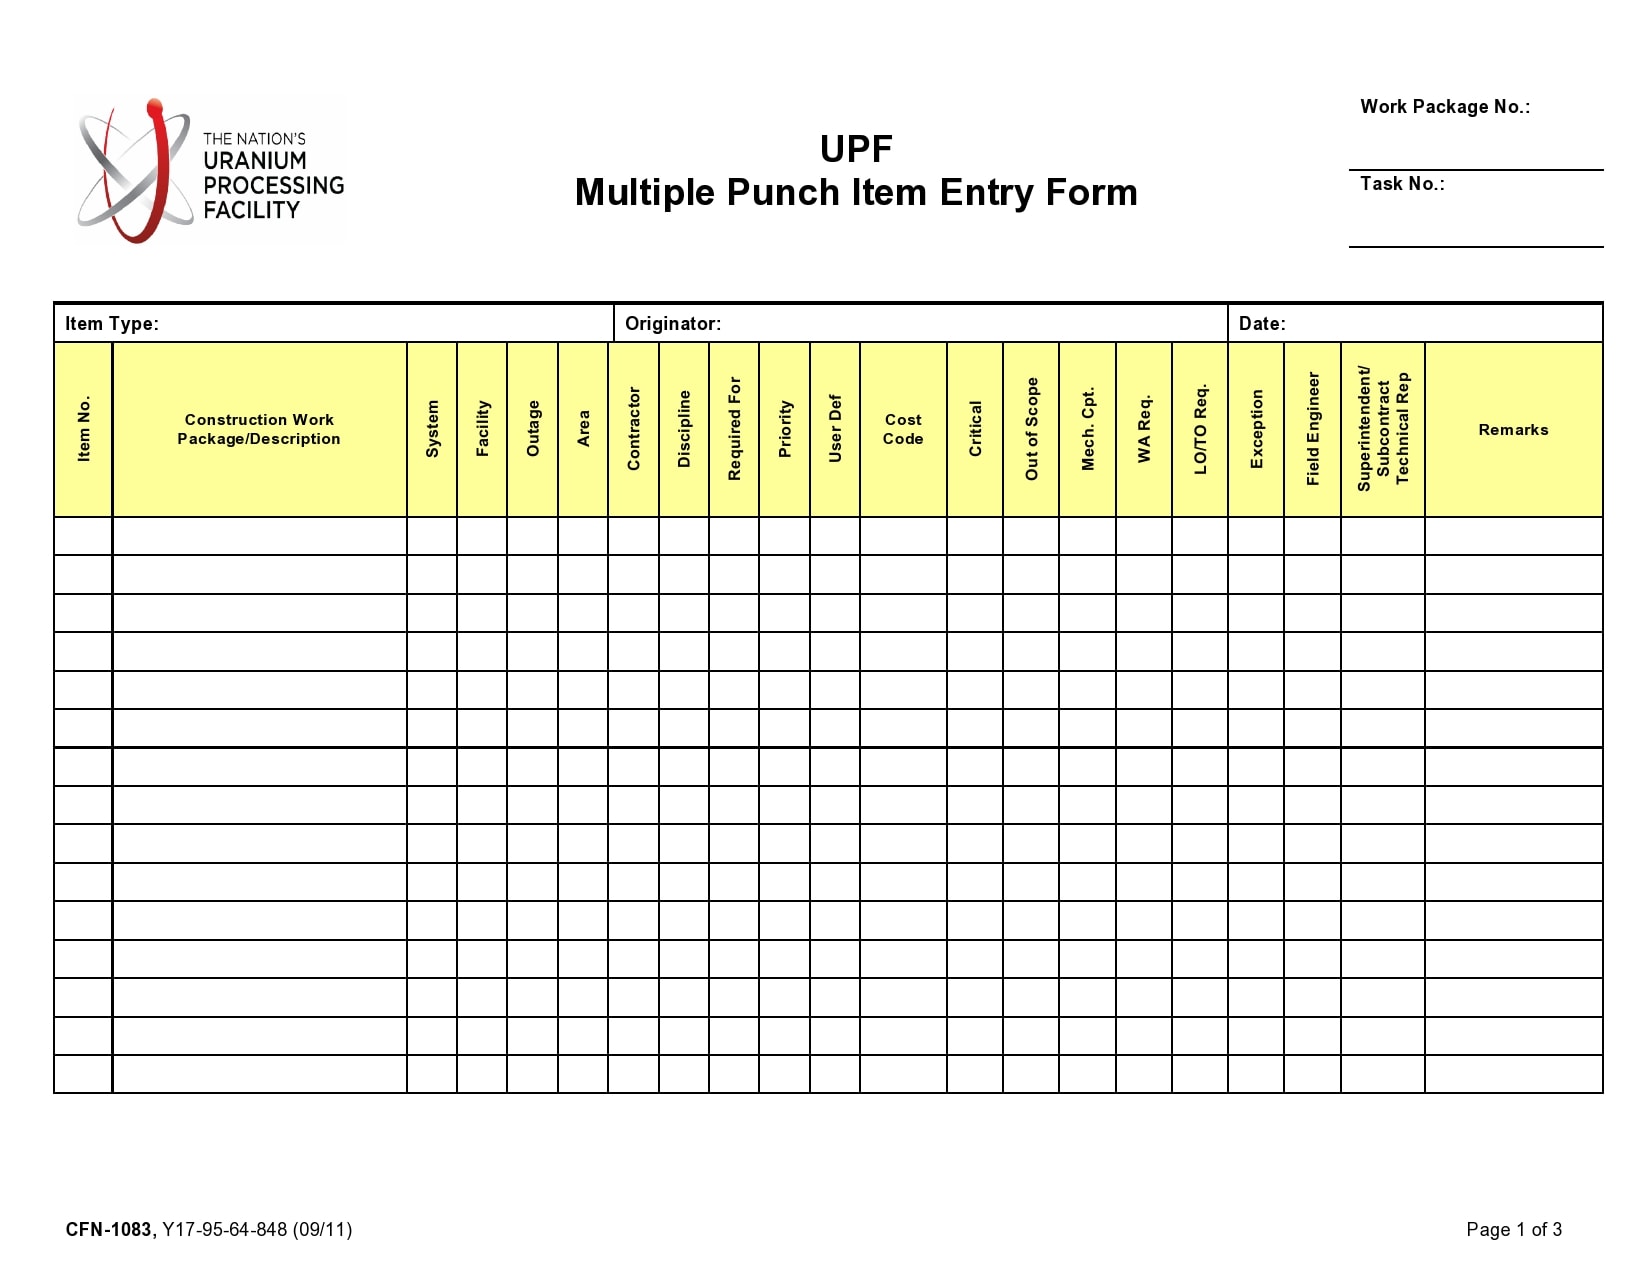 30 Great Punch List Templates & Forms [FREE] TemplateArchive